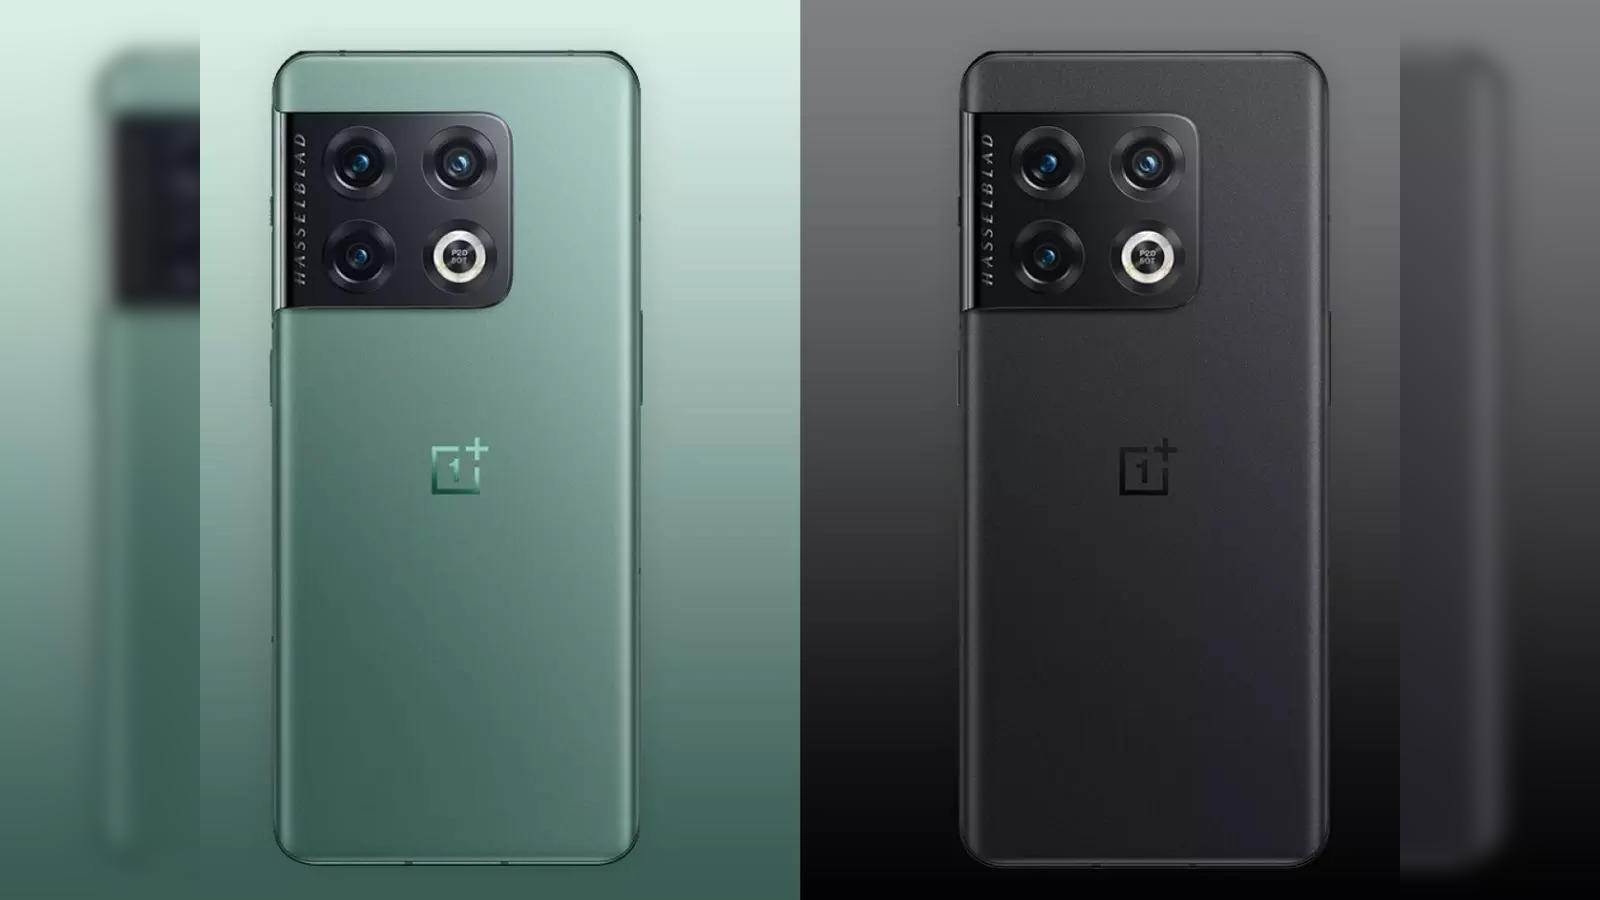 OnePlus 10 Pro with a Snapdragon 8 Gen 1 Mobile Platform